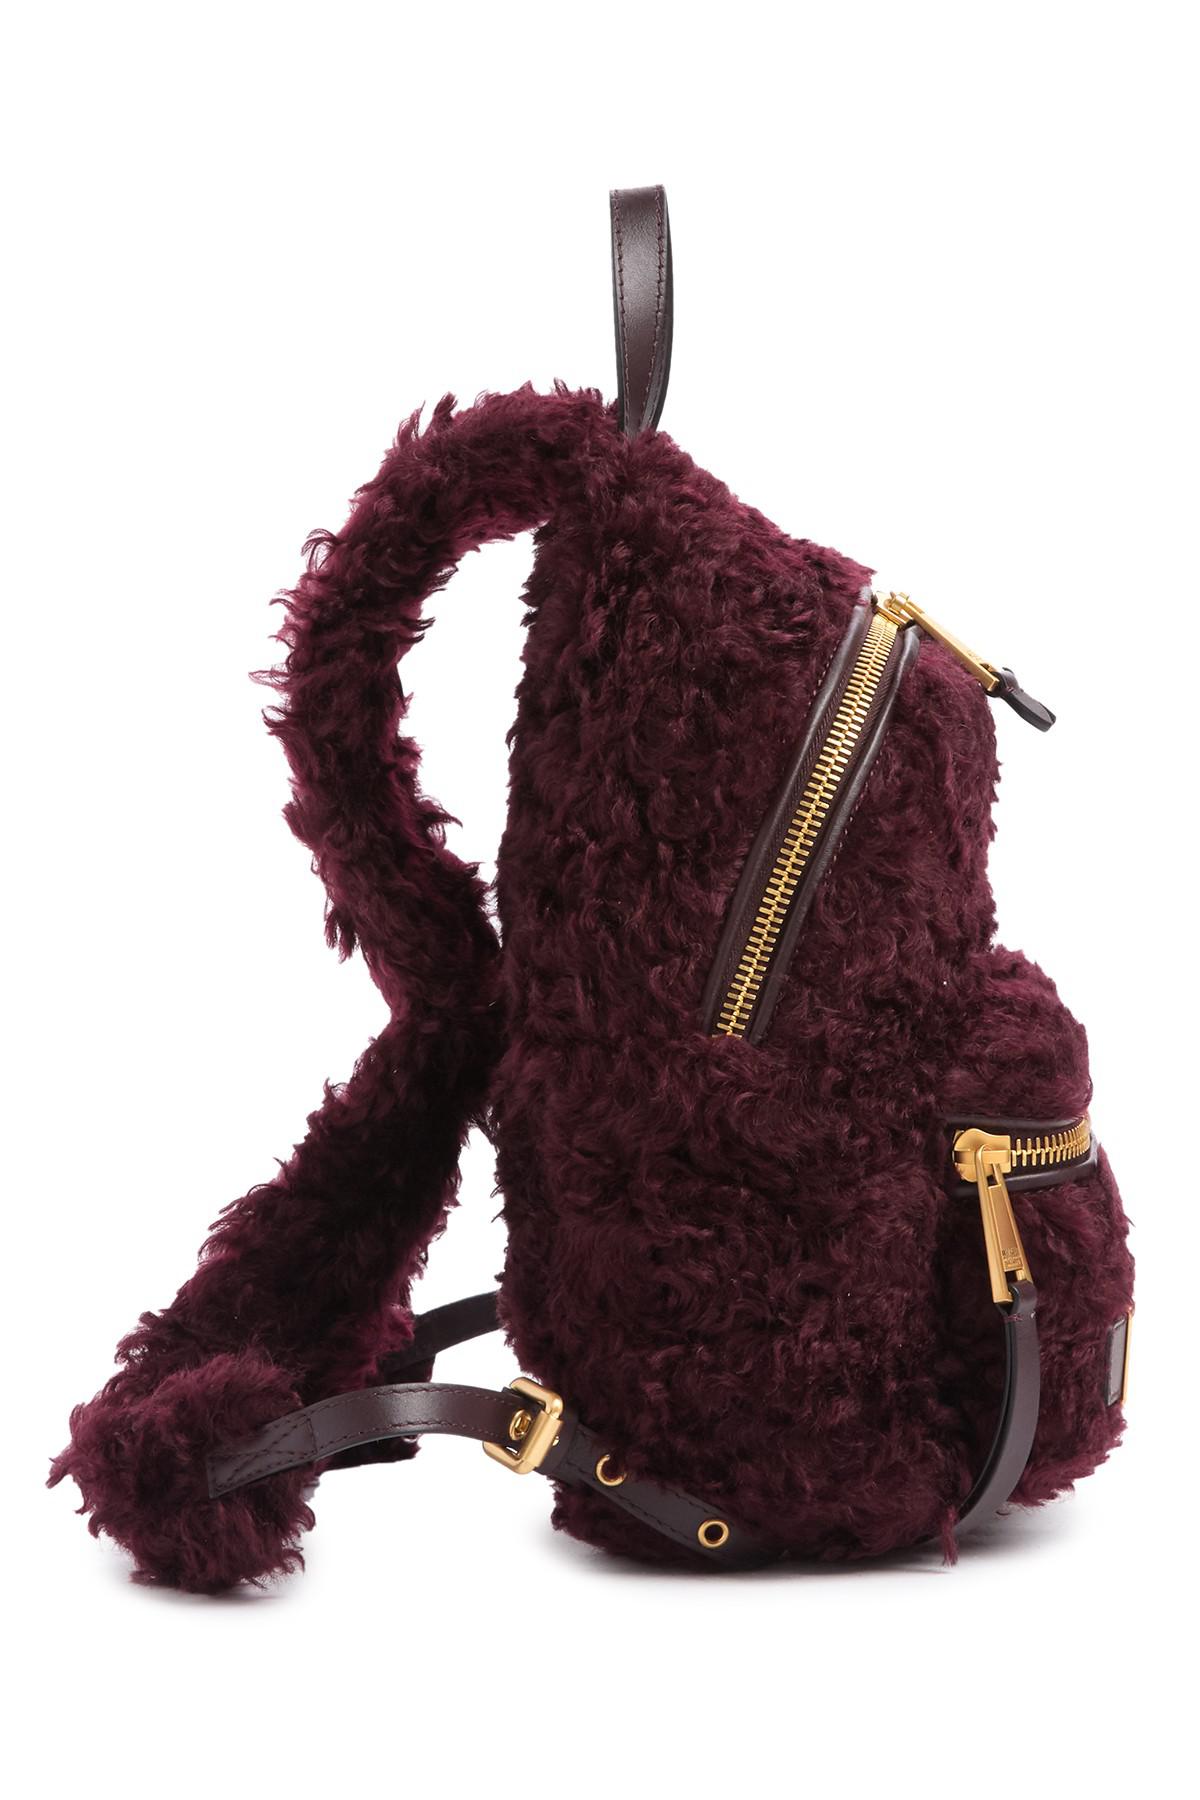 moschino mohair backpack